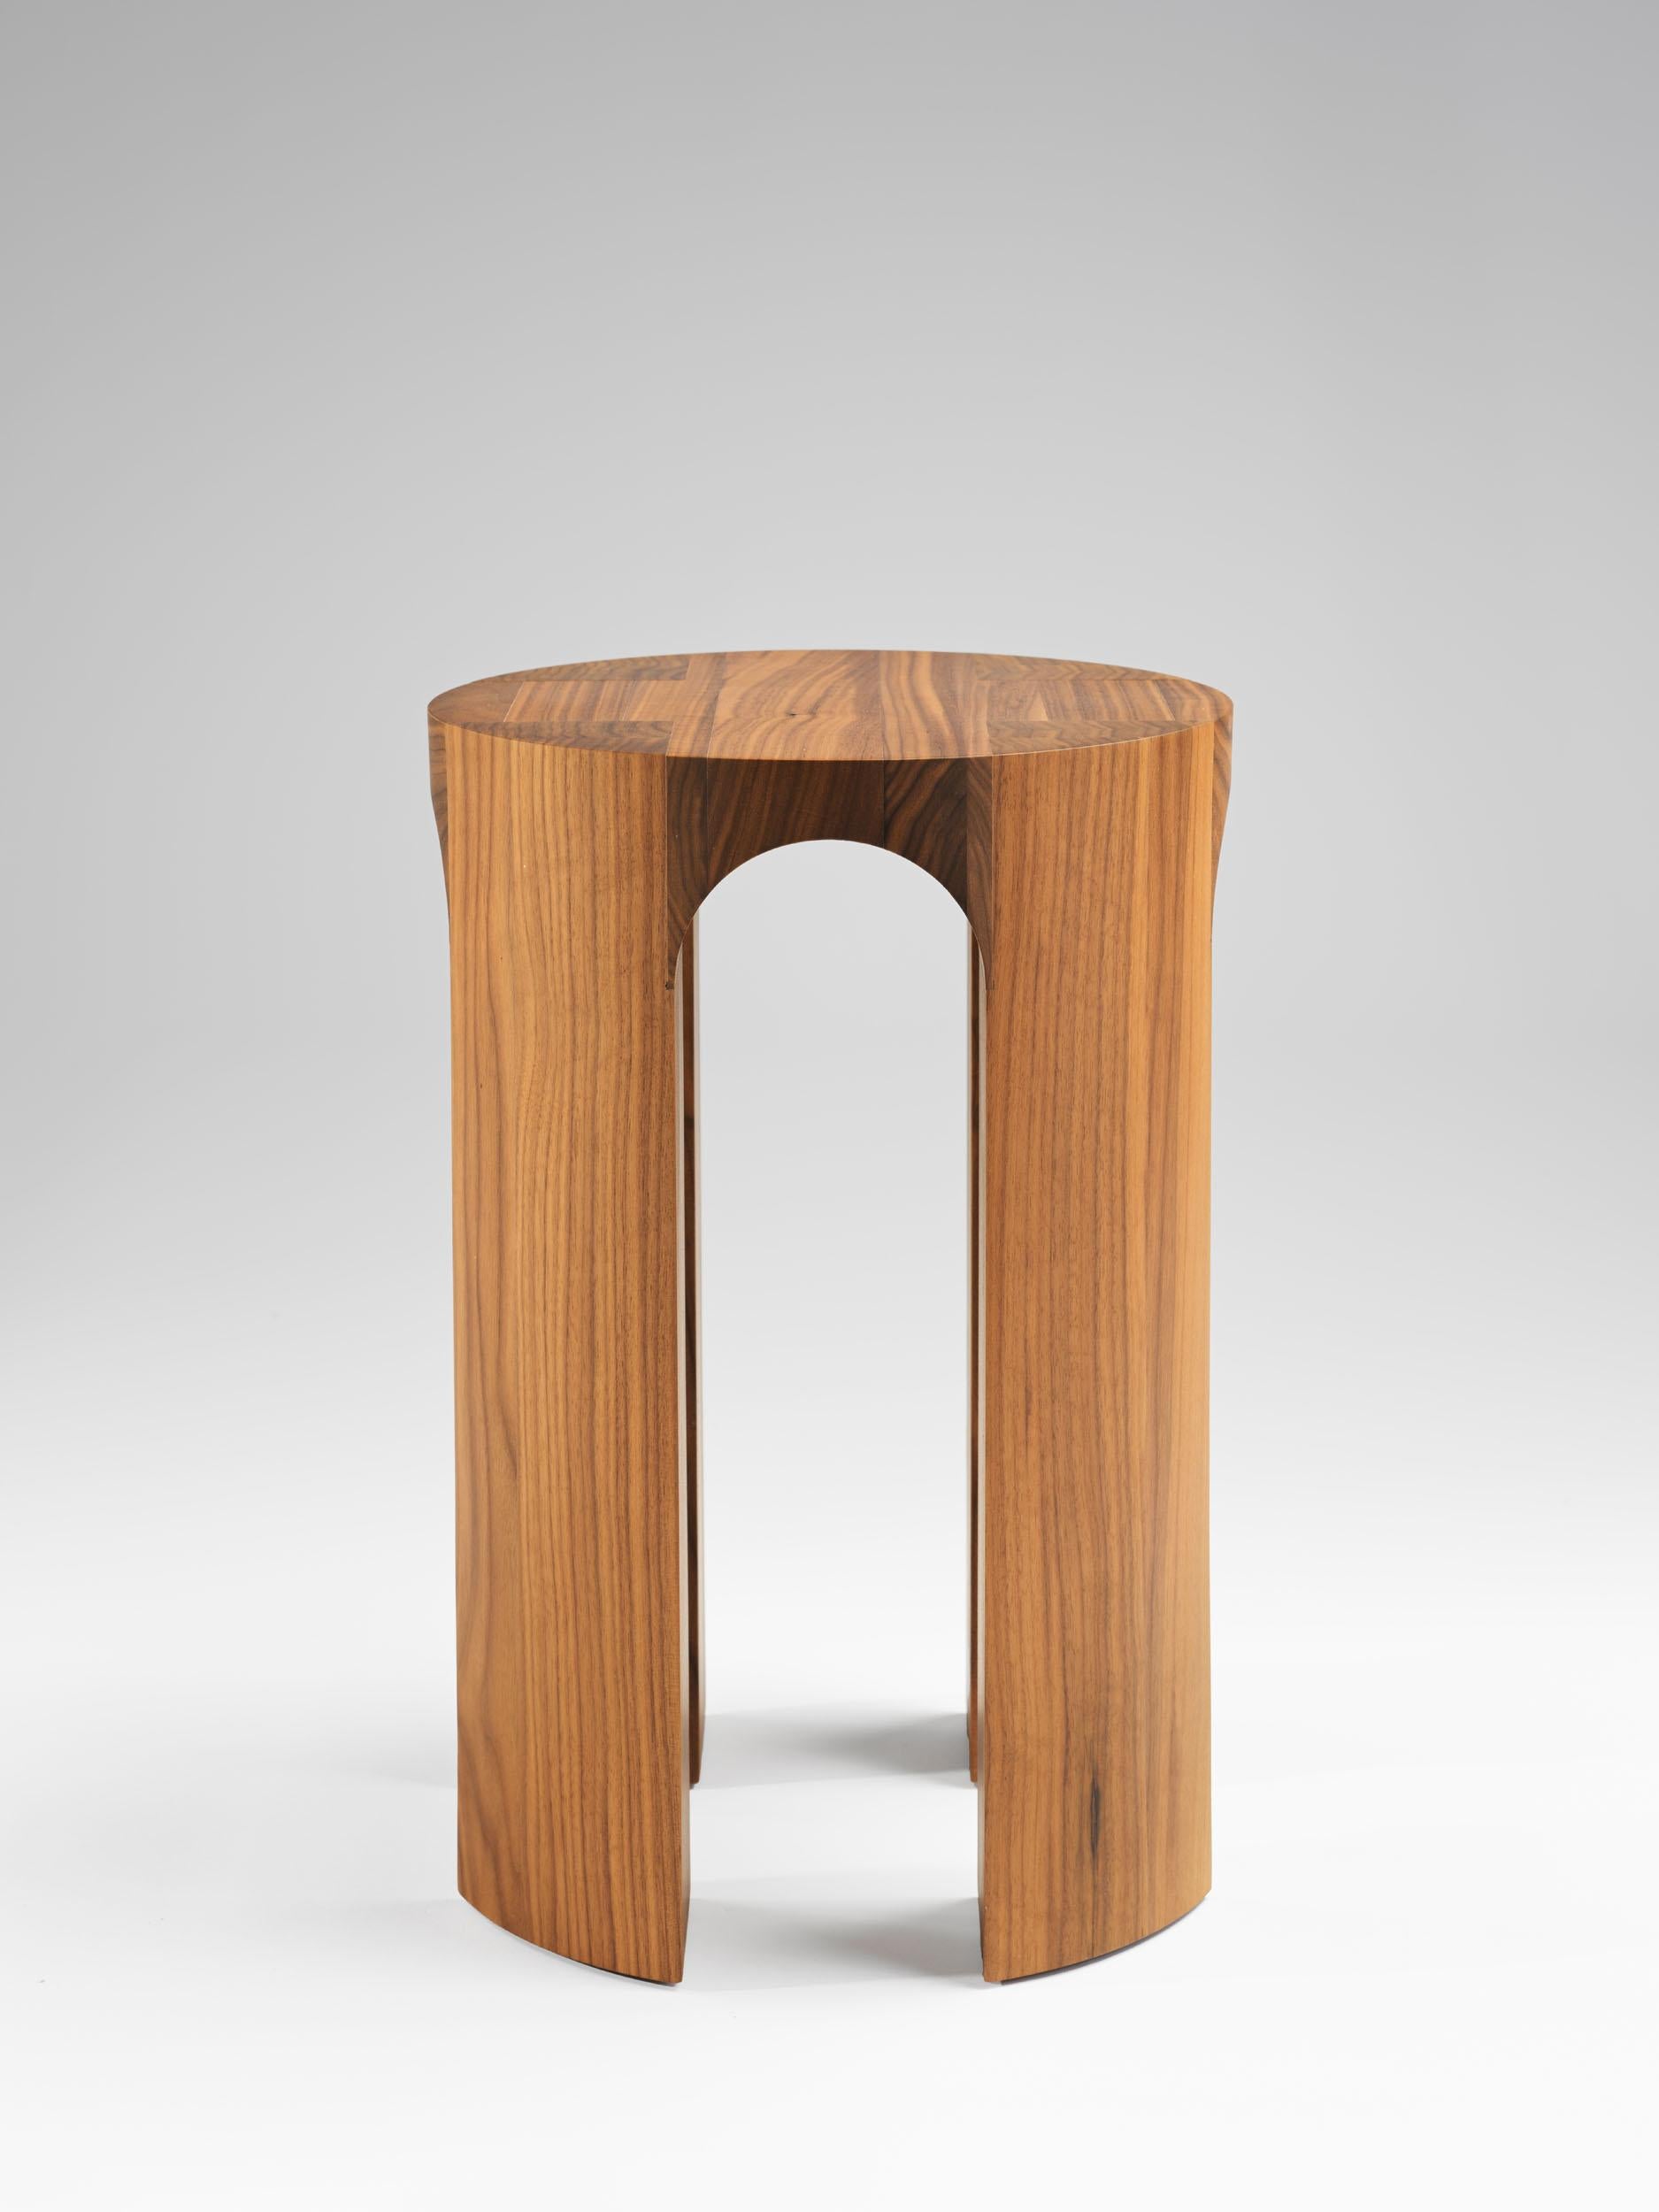 Tim Vranken is a Belgian furniture designer who focuses on solid, handmade furniture. Throughout his designs the use of pure materials and honest natural processes are paramount. The result is an unconcealed interplay of lines and shapes, without